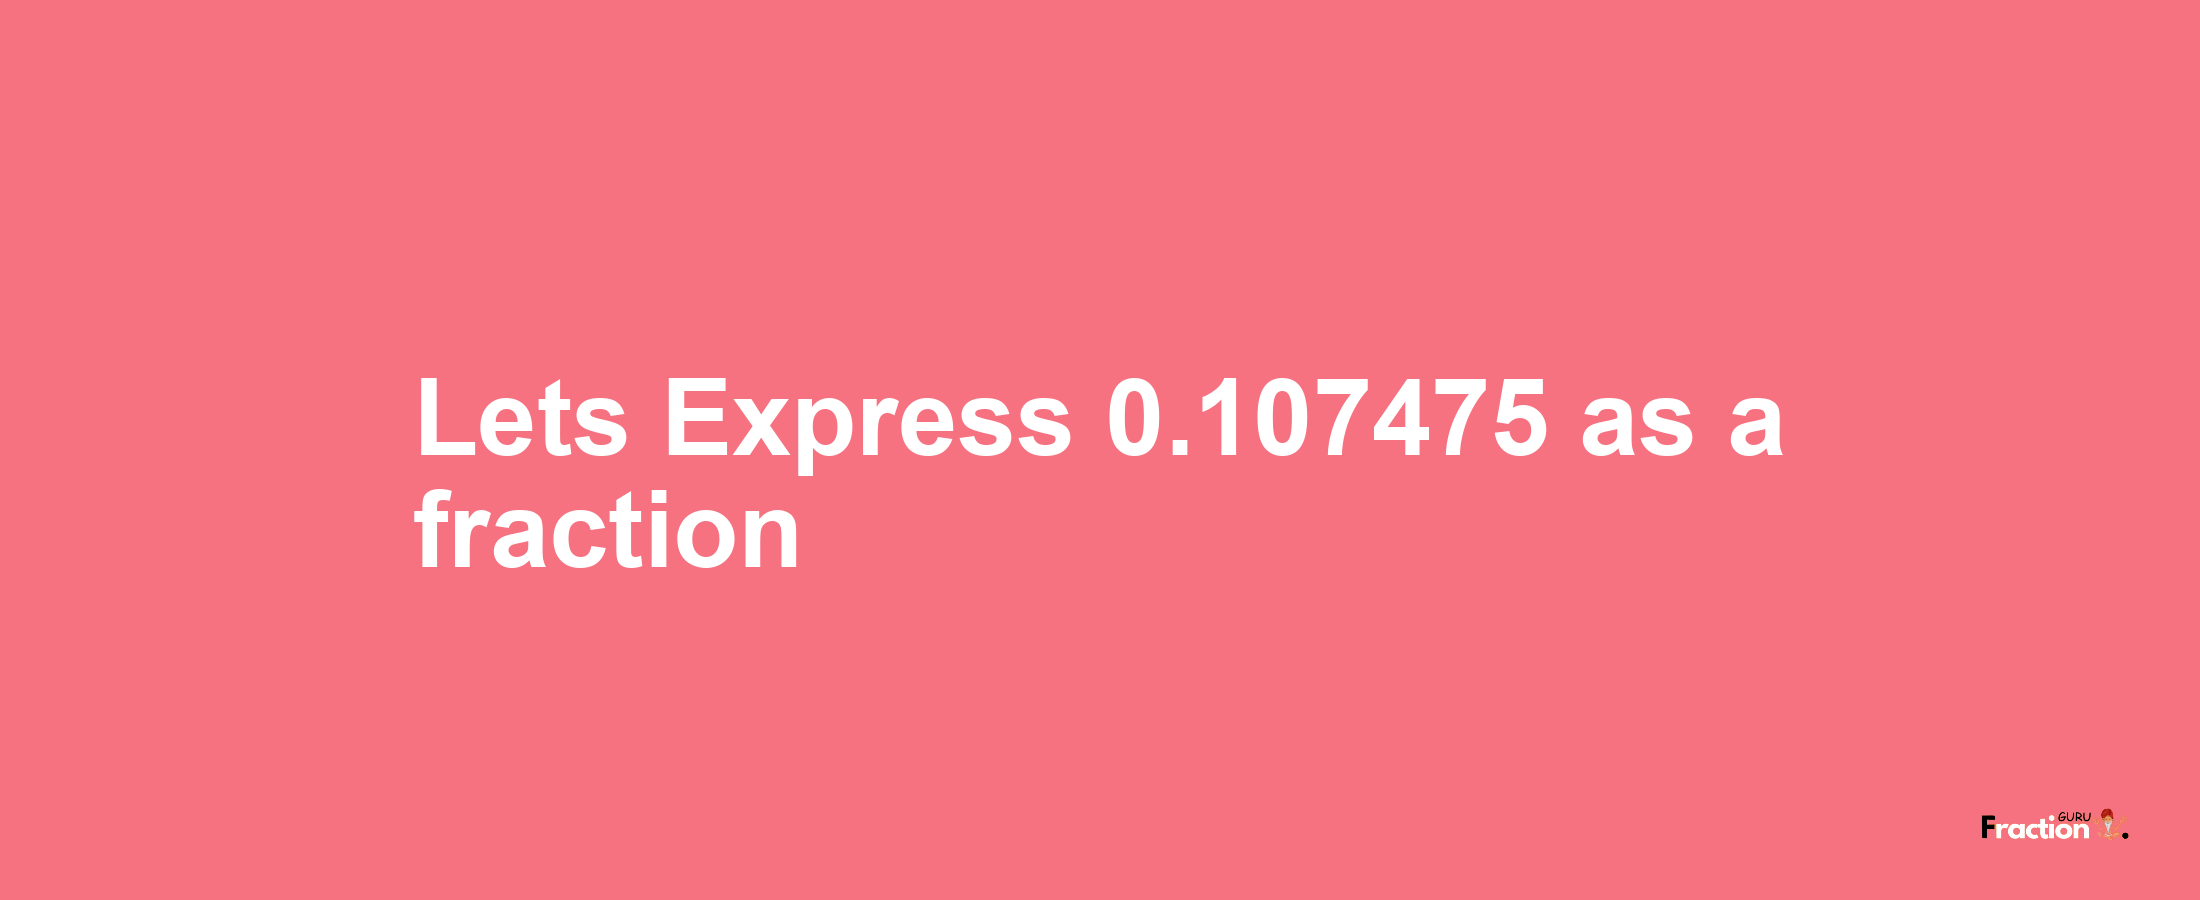 Lets Express 0.107475 as afraction